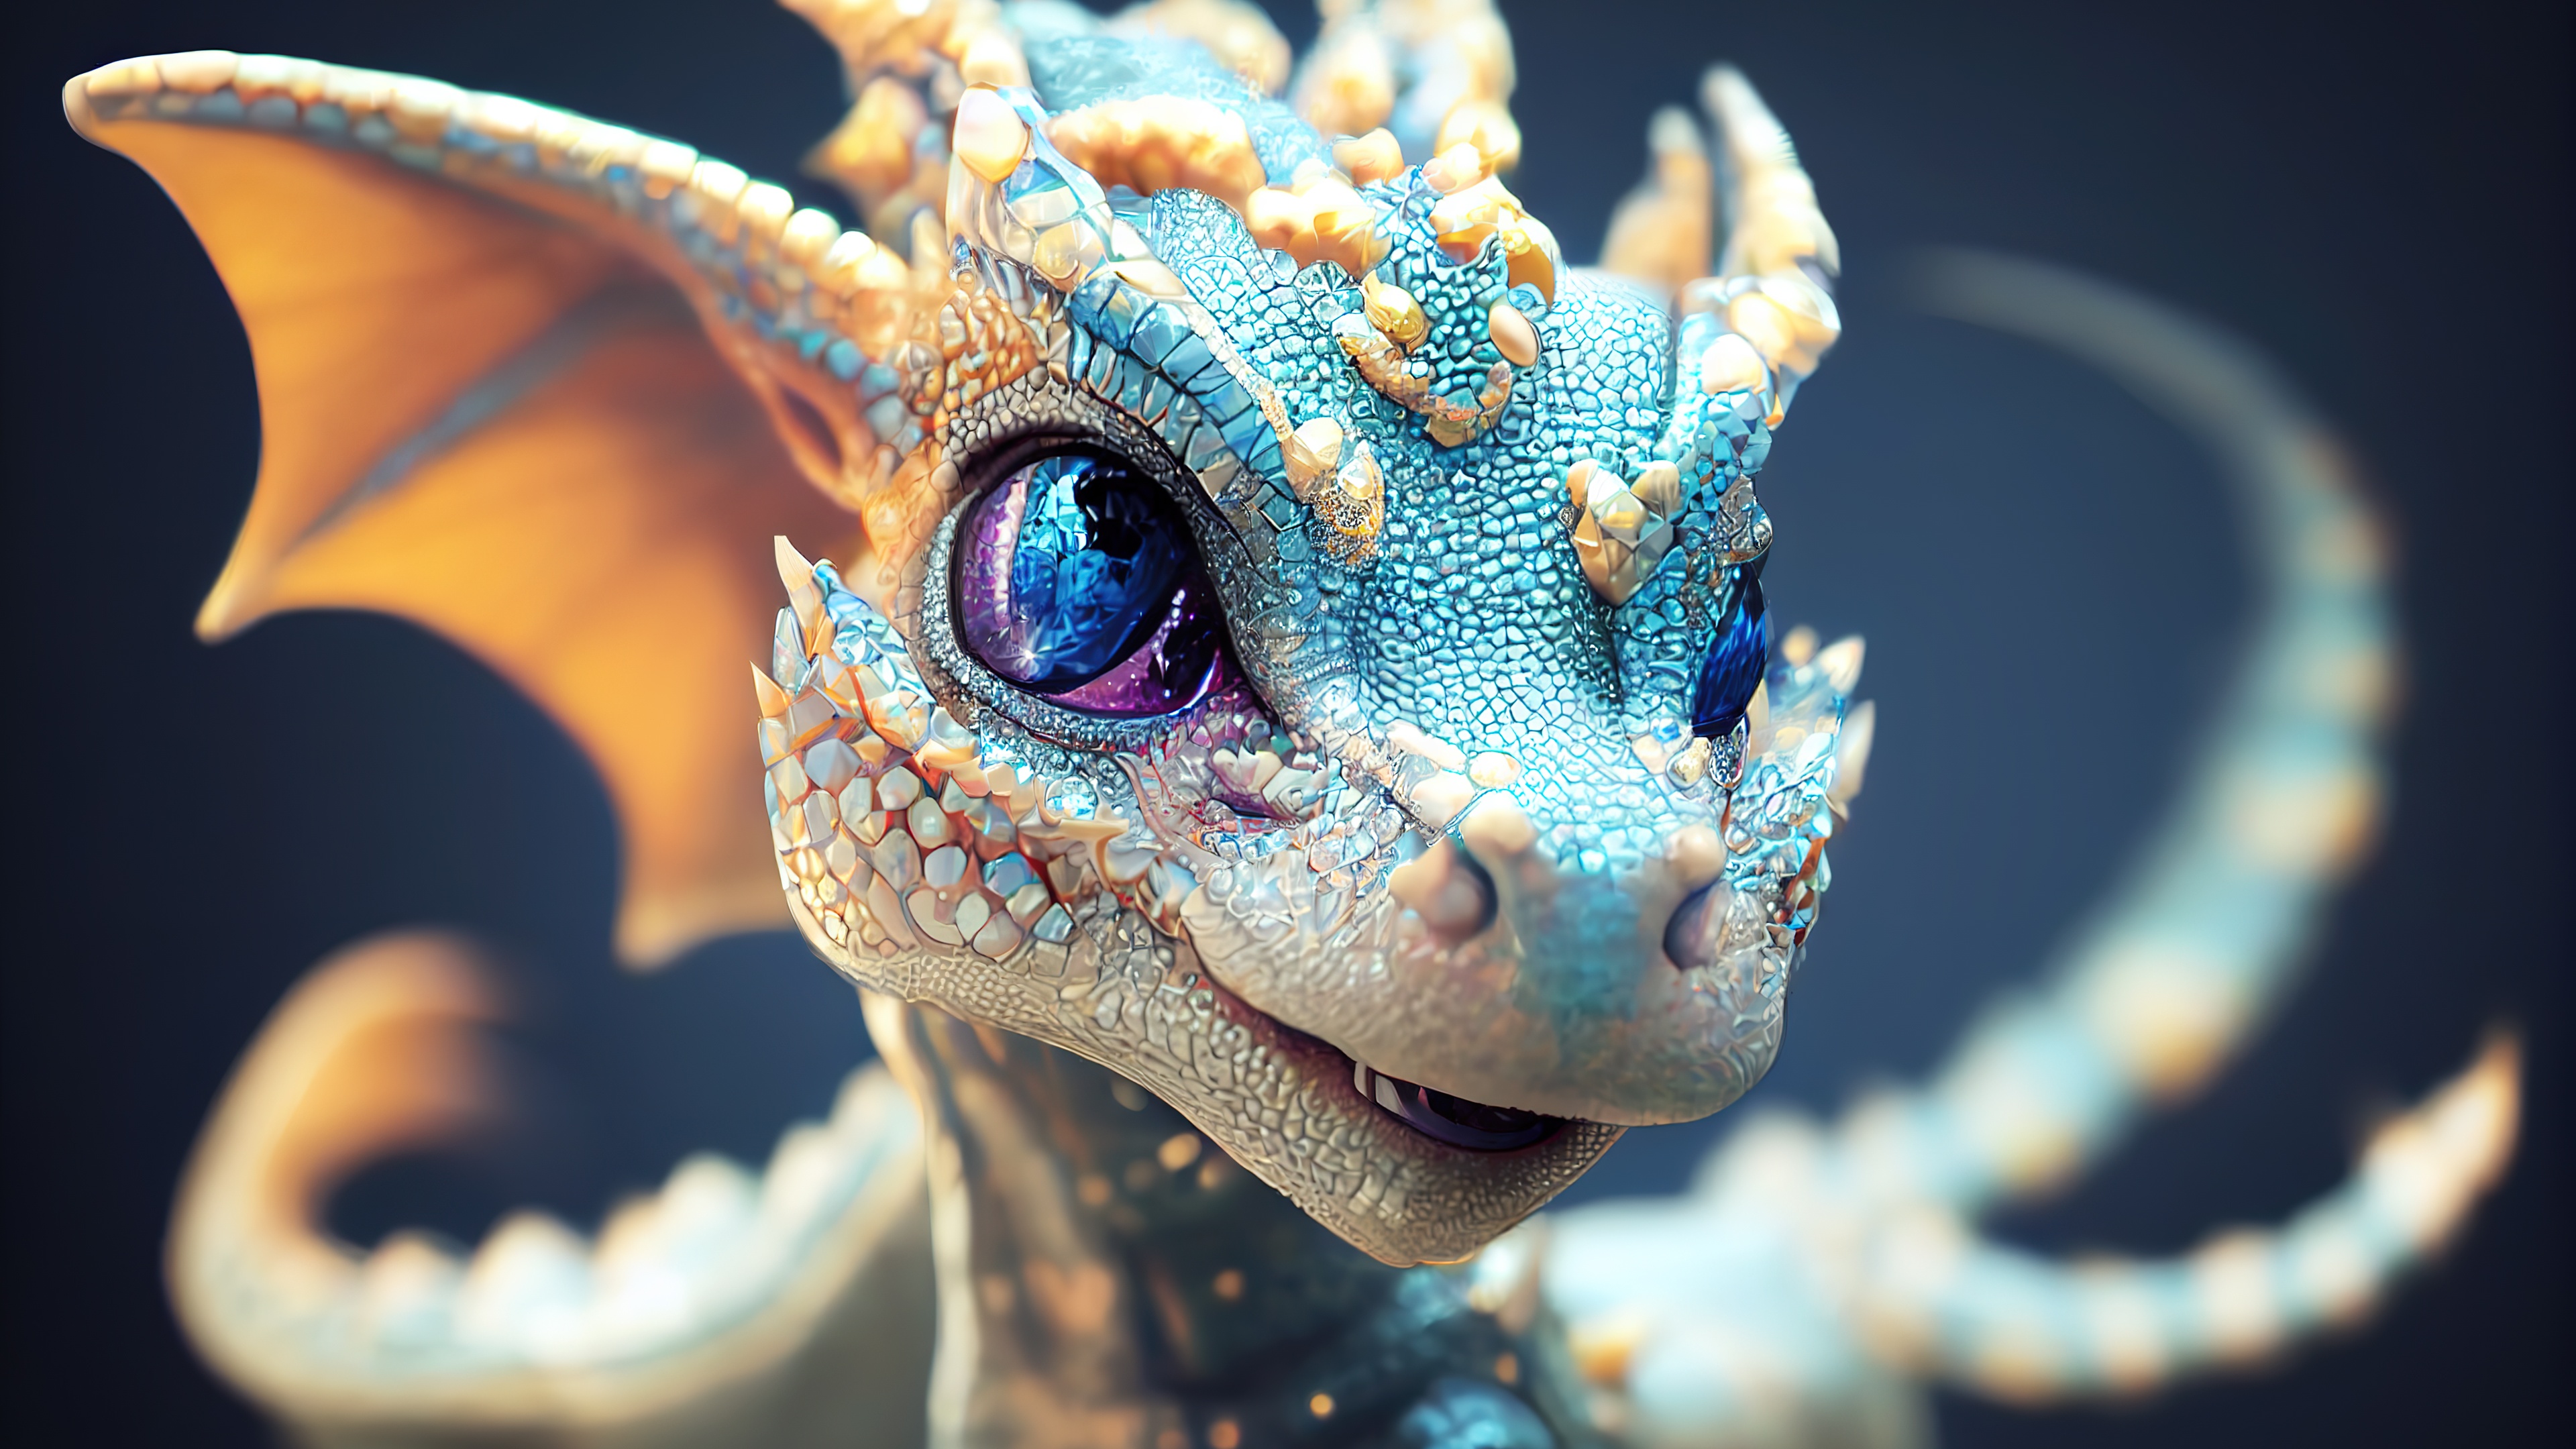 PageResourcecom  All About Web Development  Cool dragons Blue dragon  Dragon artwork fantasy